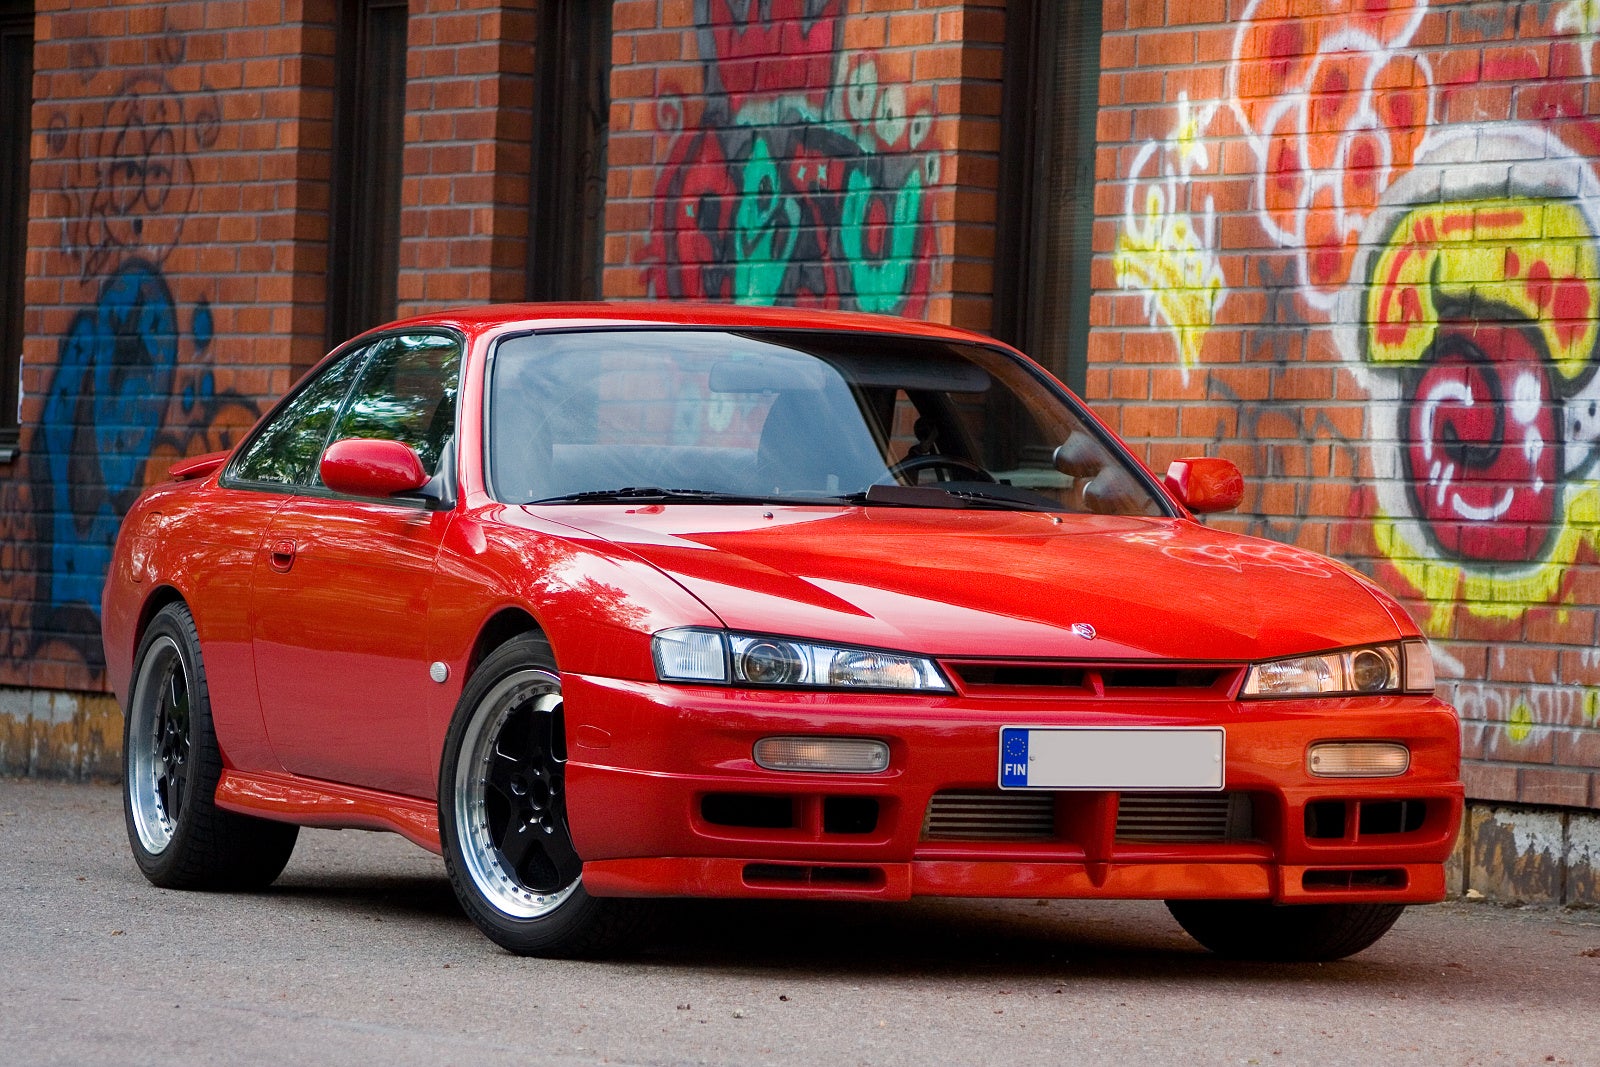 1995 Nissan silvia s14 review